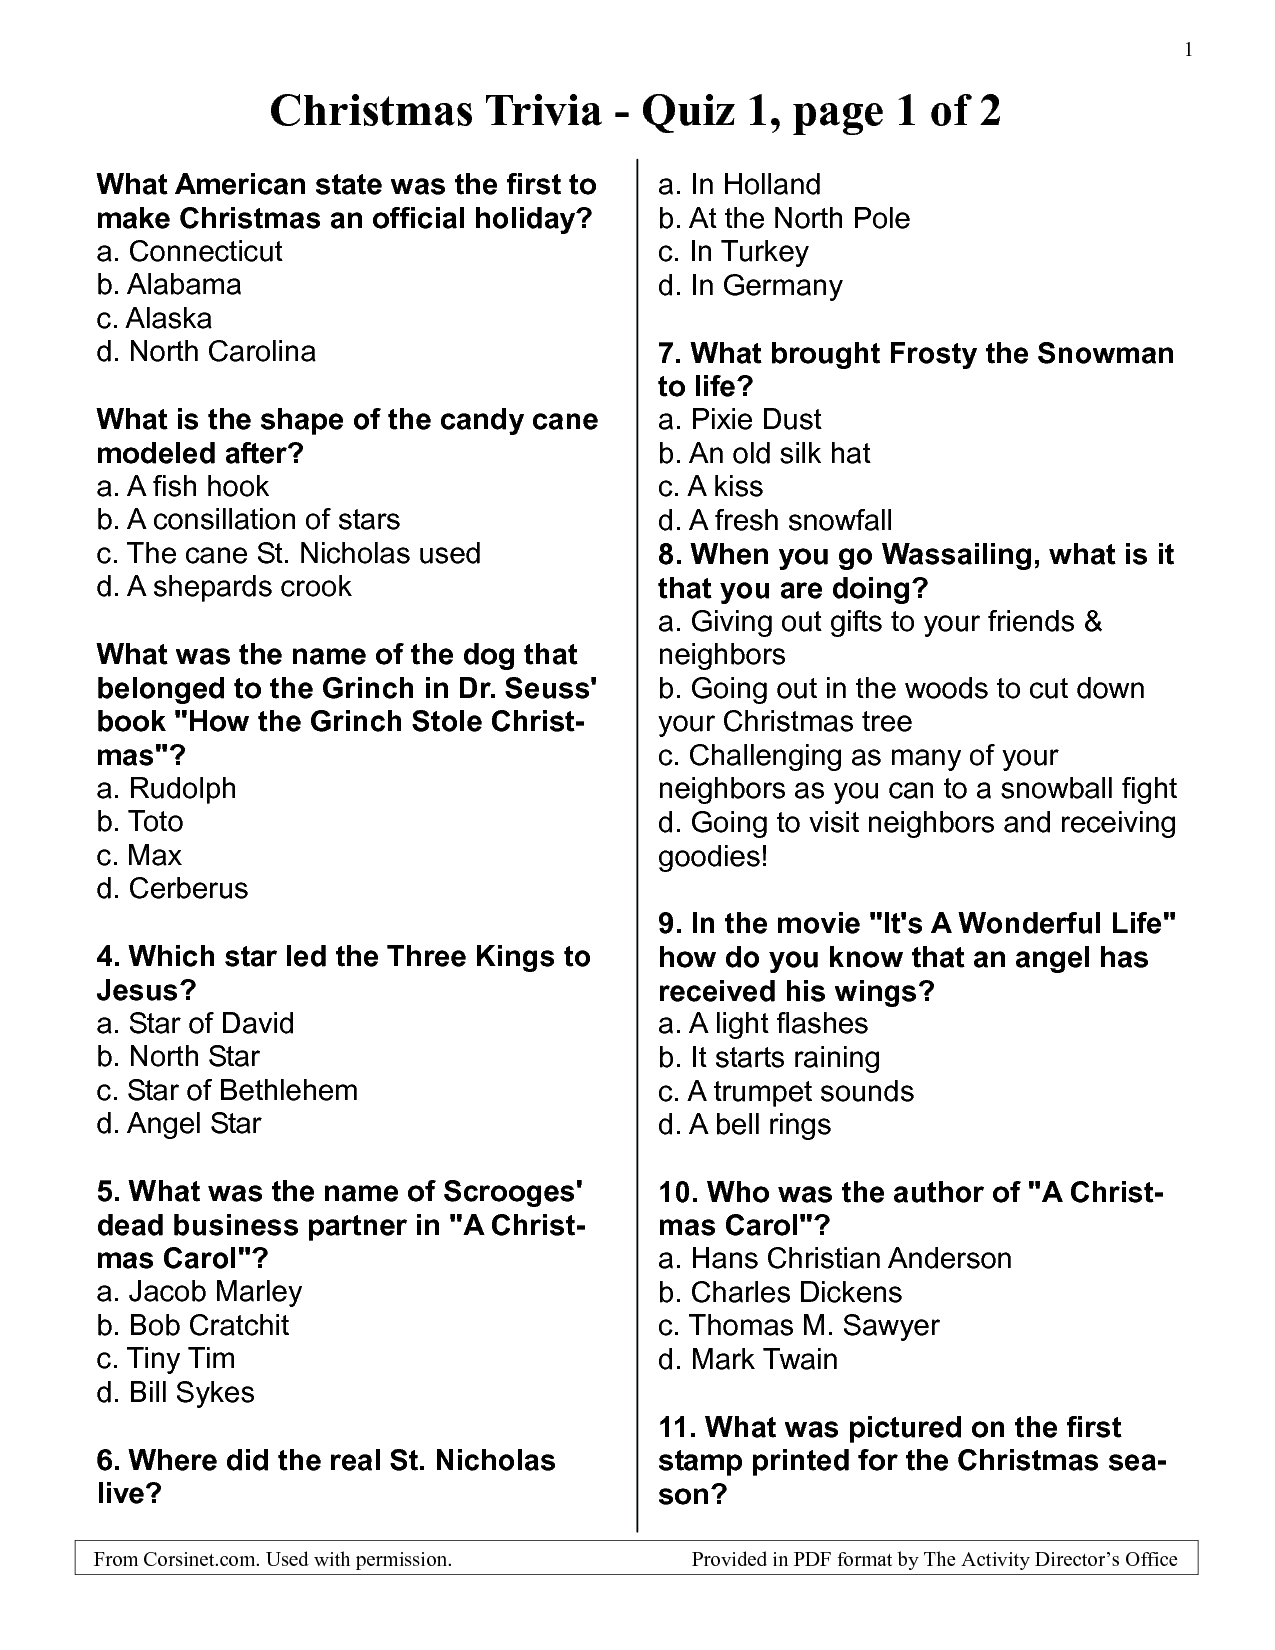 Free Printable Christmas Bible Trivia Questions And Answers